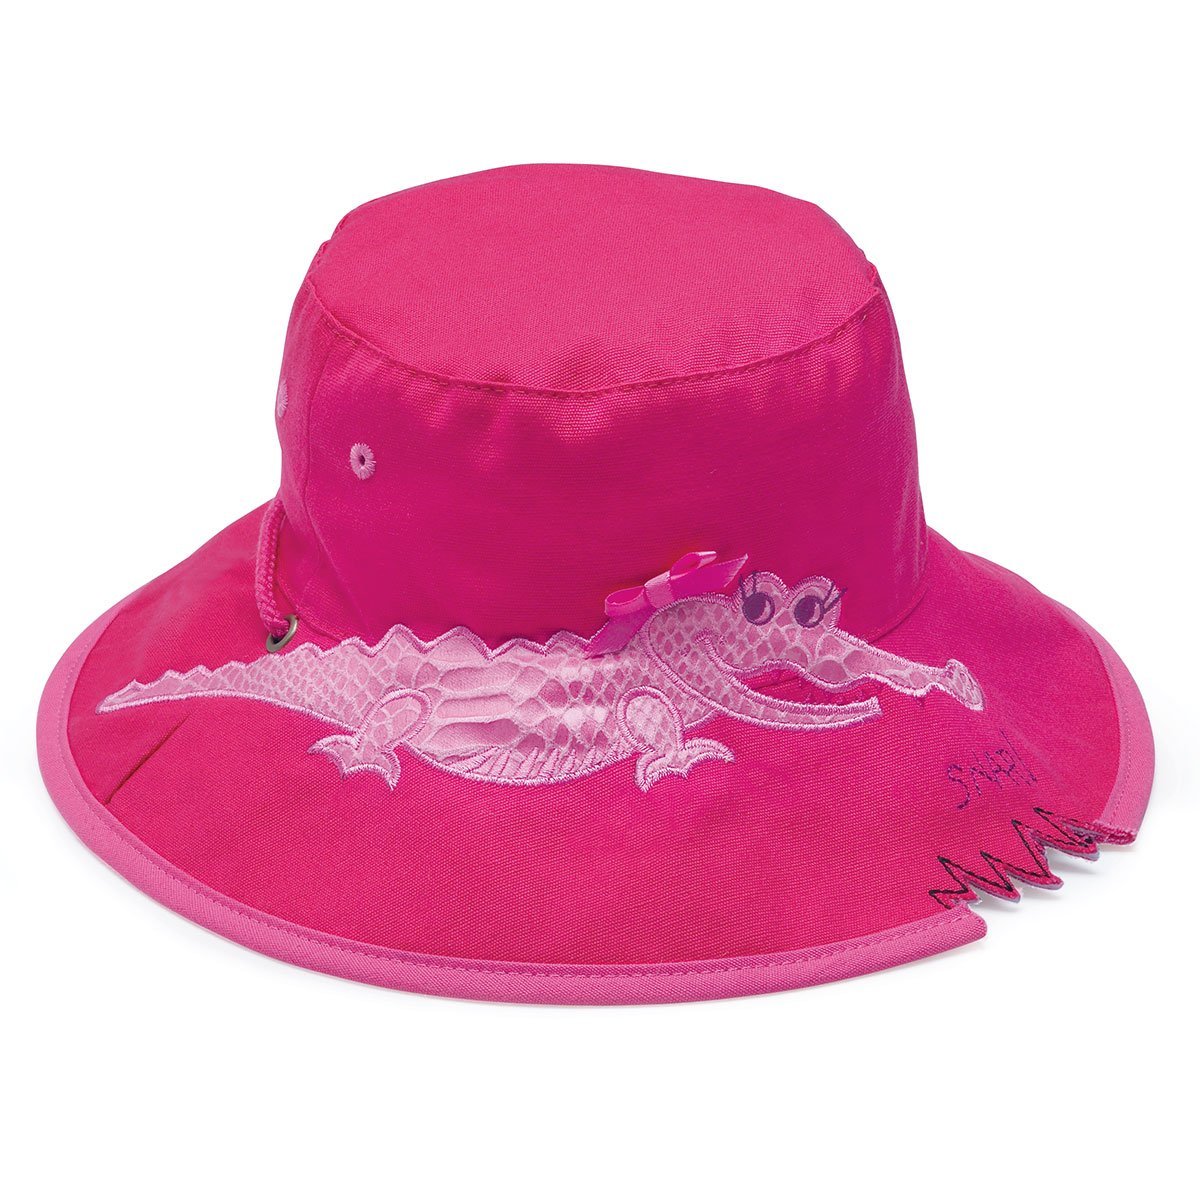 Featuring Crocodile Cotton UPF Sun Protection Hat with Chinstrap in Pink from Wallaroo